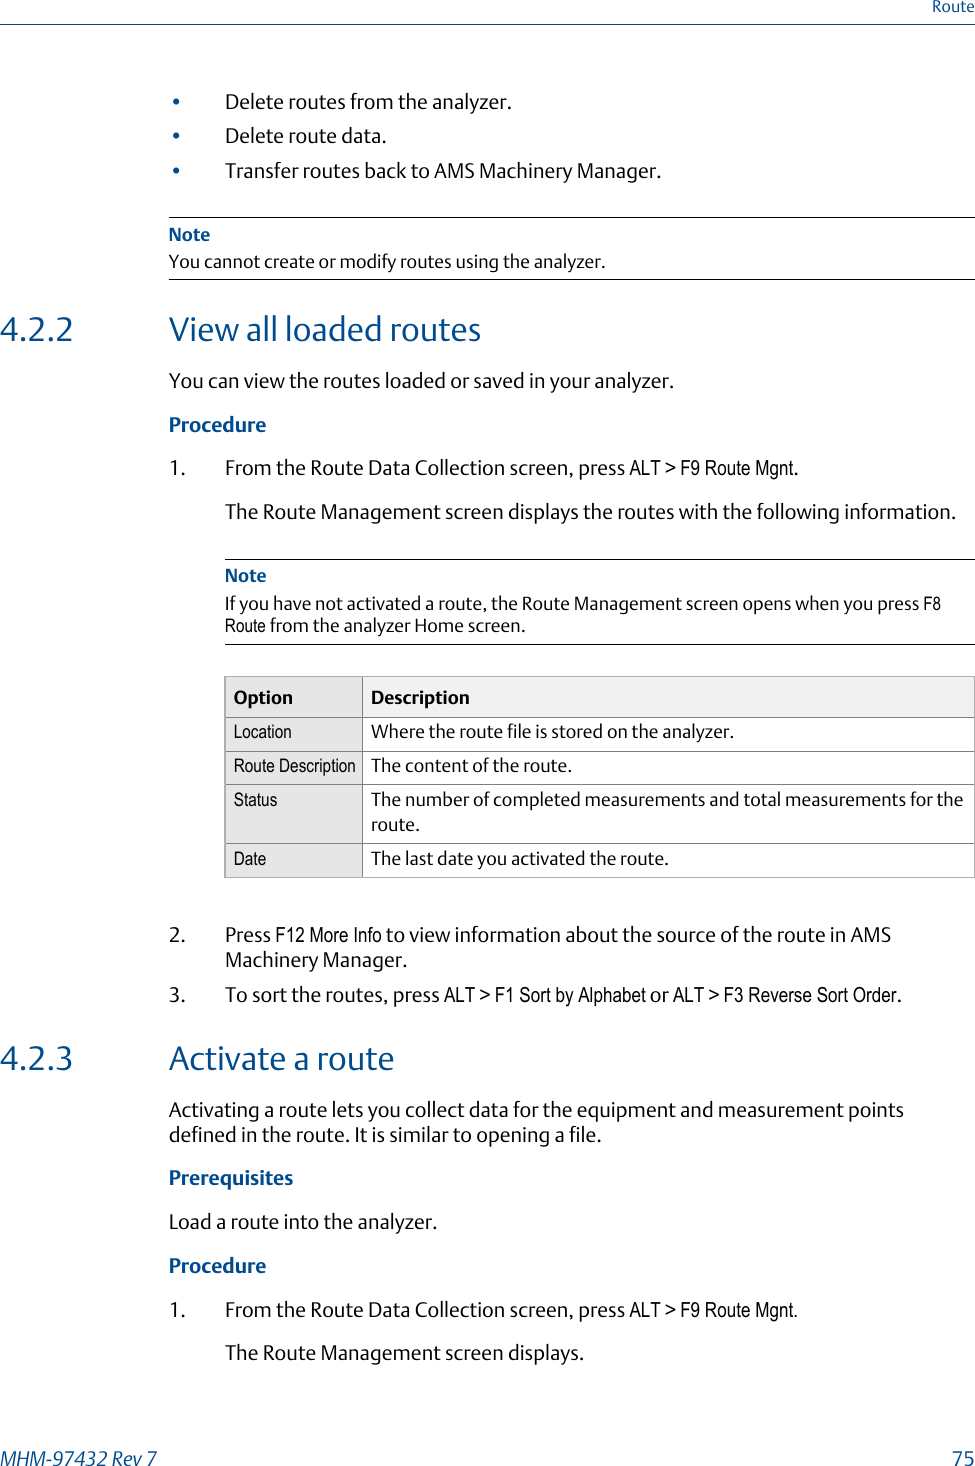 •Delete routes from the analyzer.•Delete route data.•Transfer routes back to AMS Machinery Manager.NoteYou cannot create or modify routes using the analyzer.4.2.2 View all loaded routesYou can view the routes loaded or saved in your analyzer.Procedure1. From the Route Data Collection screen, press ALT &gt; F9 Route Mgnt.The Route Management screen displays the routes with the following information.NoteIf you have not activated a route, the Route Management screen opens when you press F8Route from the analyzer Home screen.Option DescriptionLocation Where the route file is stored on the analyzer.Route Description The content of the route.Status The number of completed measurements and total measurements for theroute.Date The last date you activated the route.2. Press F12 More Info to view information about the source of the route in AMSMachinery Manager.3. To sort the routes, press ALT &gt; F1 Sort by Alphabet or ALT &gt; F3 Reverse Sort Order.4.2.3 Activate a routeActivating a route lets you collect data for the equipment and measurement pointsdefined in the route. It is similar to opening a file.PrerequisitesLoad a route into the analyzer.Procedure1. From the Route Data Collection screen, press ALT &gt; F9 Route Mgnt.The Route Management screen displays.RouteMHM-97432 Rev 7  75